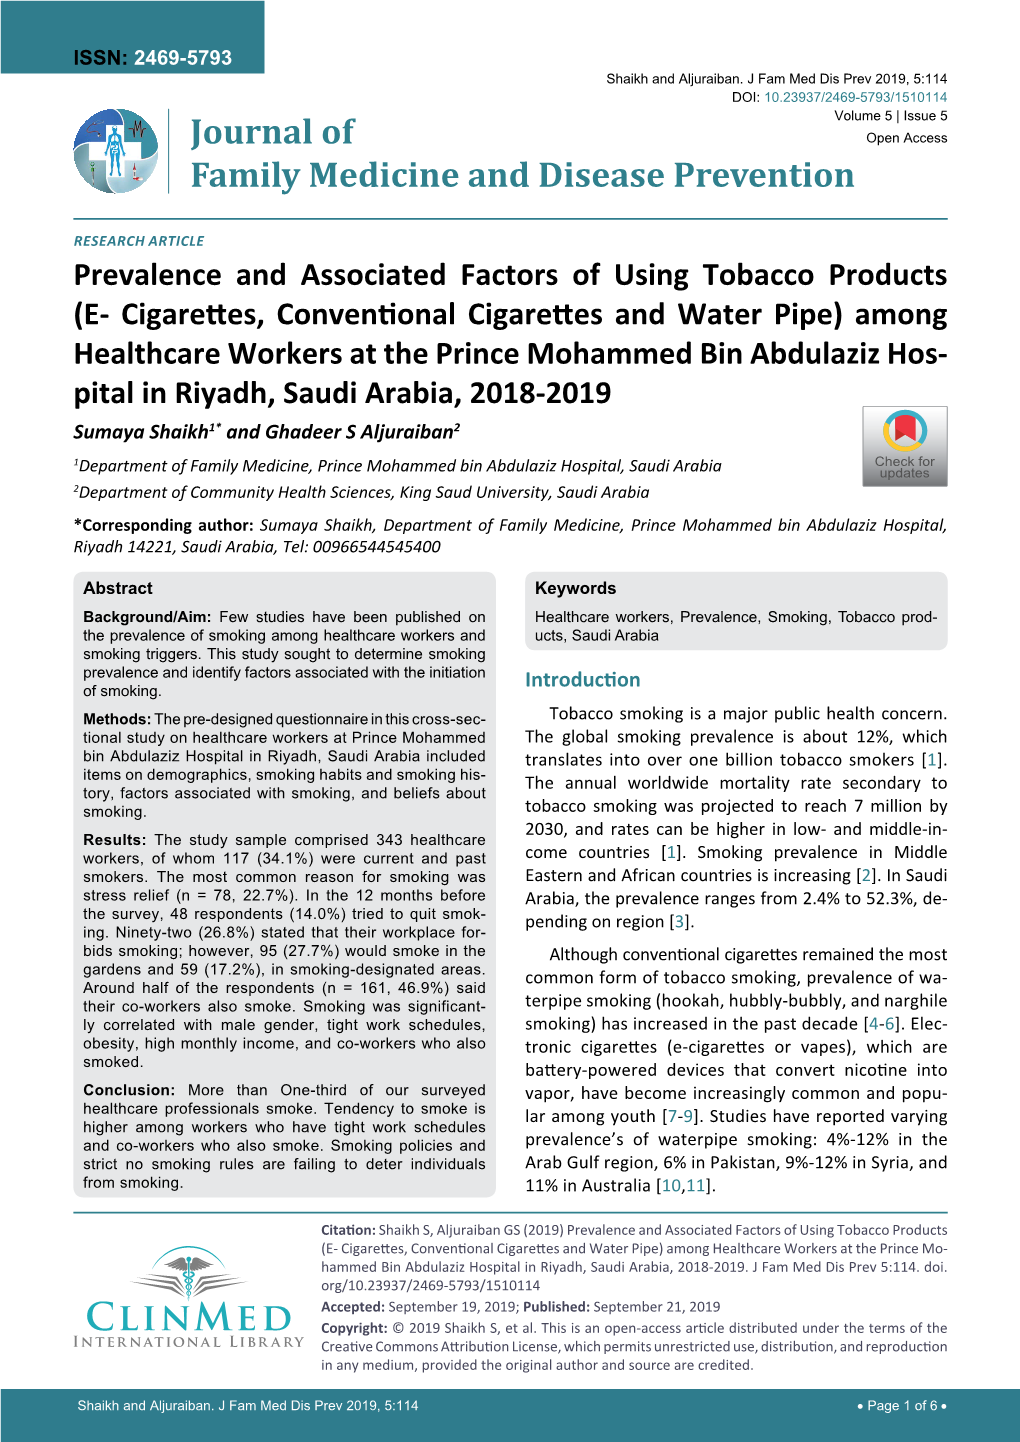 Prevalence and Associated Factors of Using Tobacco Products